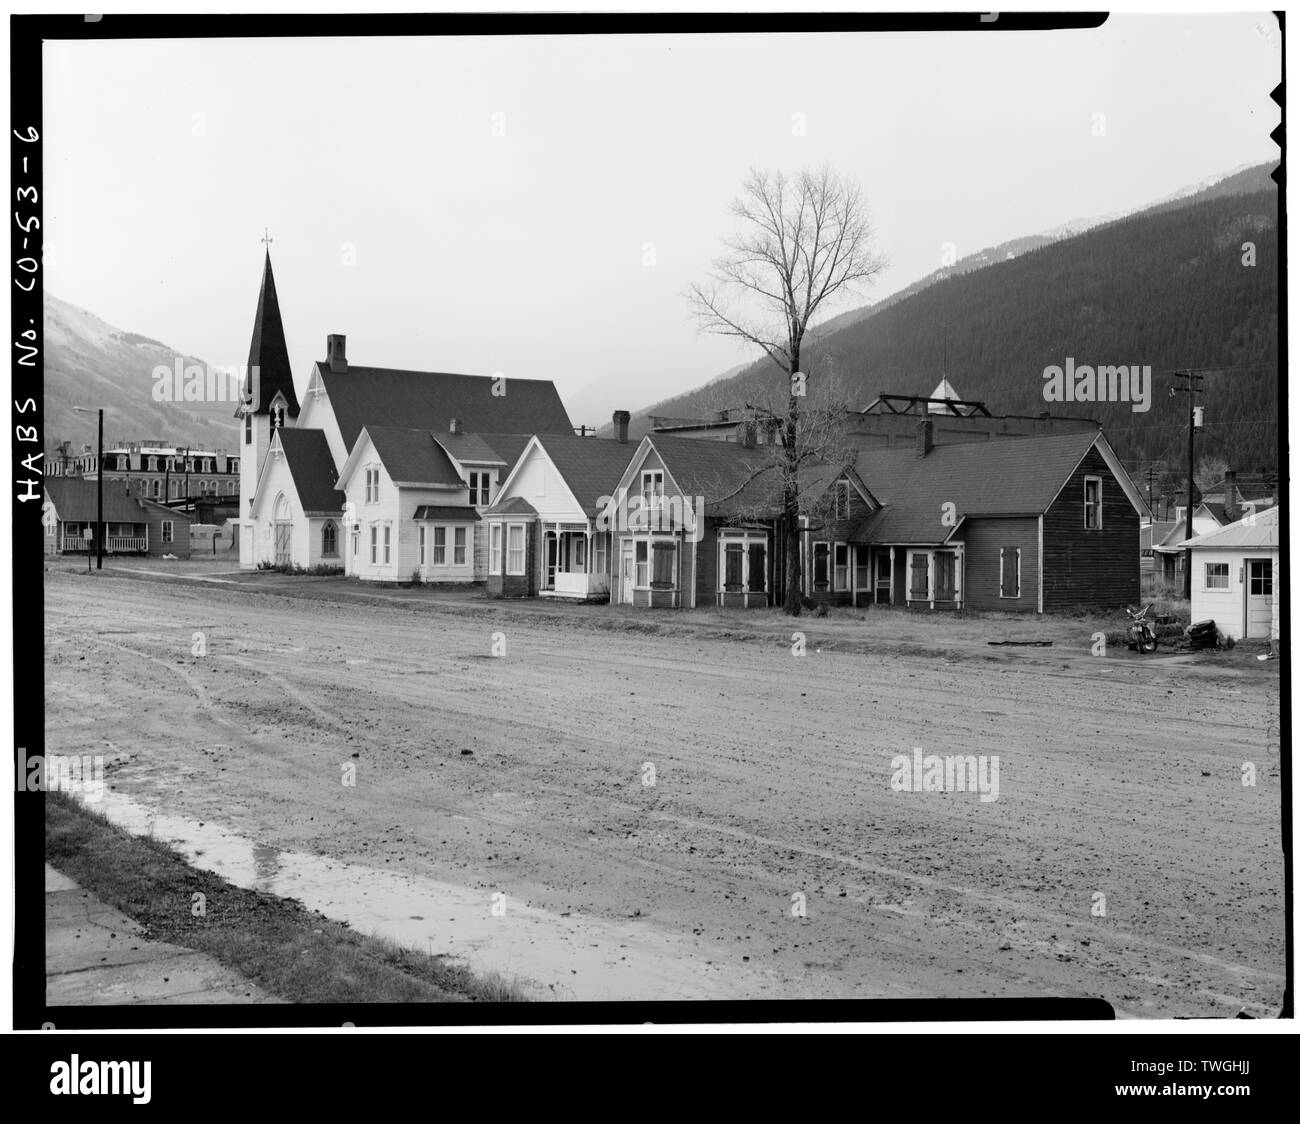 REESE ST. BETWEEN 10TH AND 11TH STS., GENERAL VIEW - Silverton Historic District, Silverton, San Juan County, CO Stock Photo